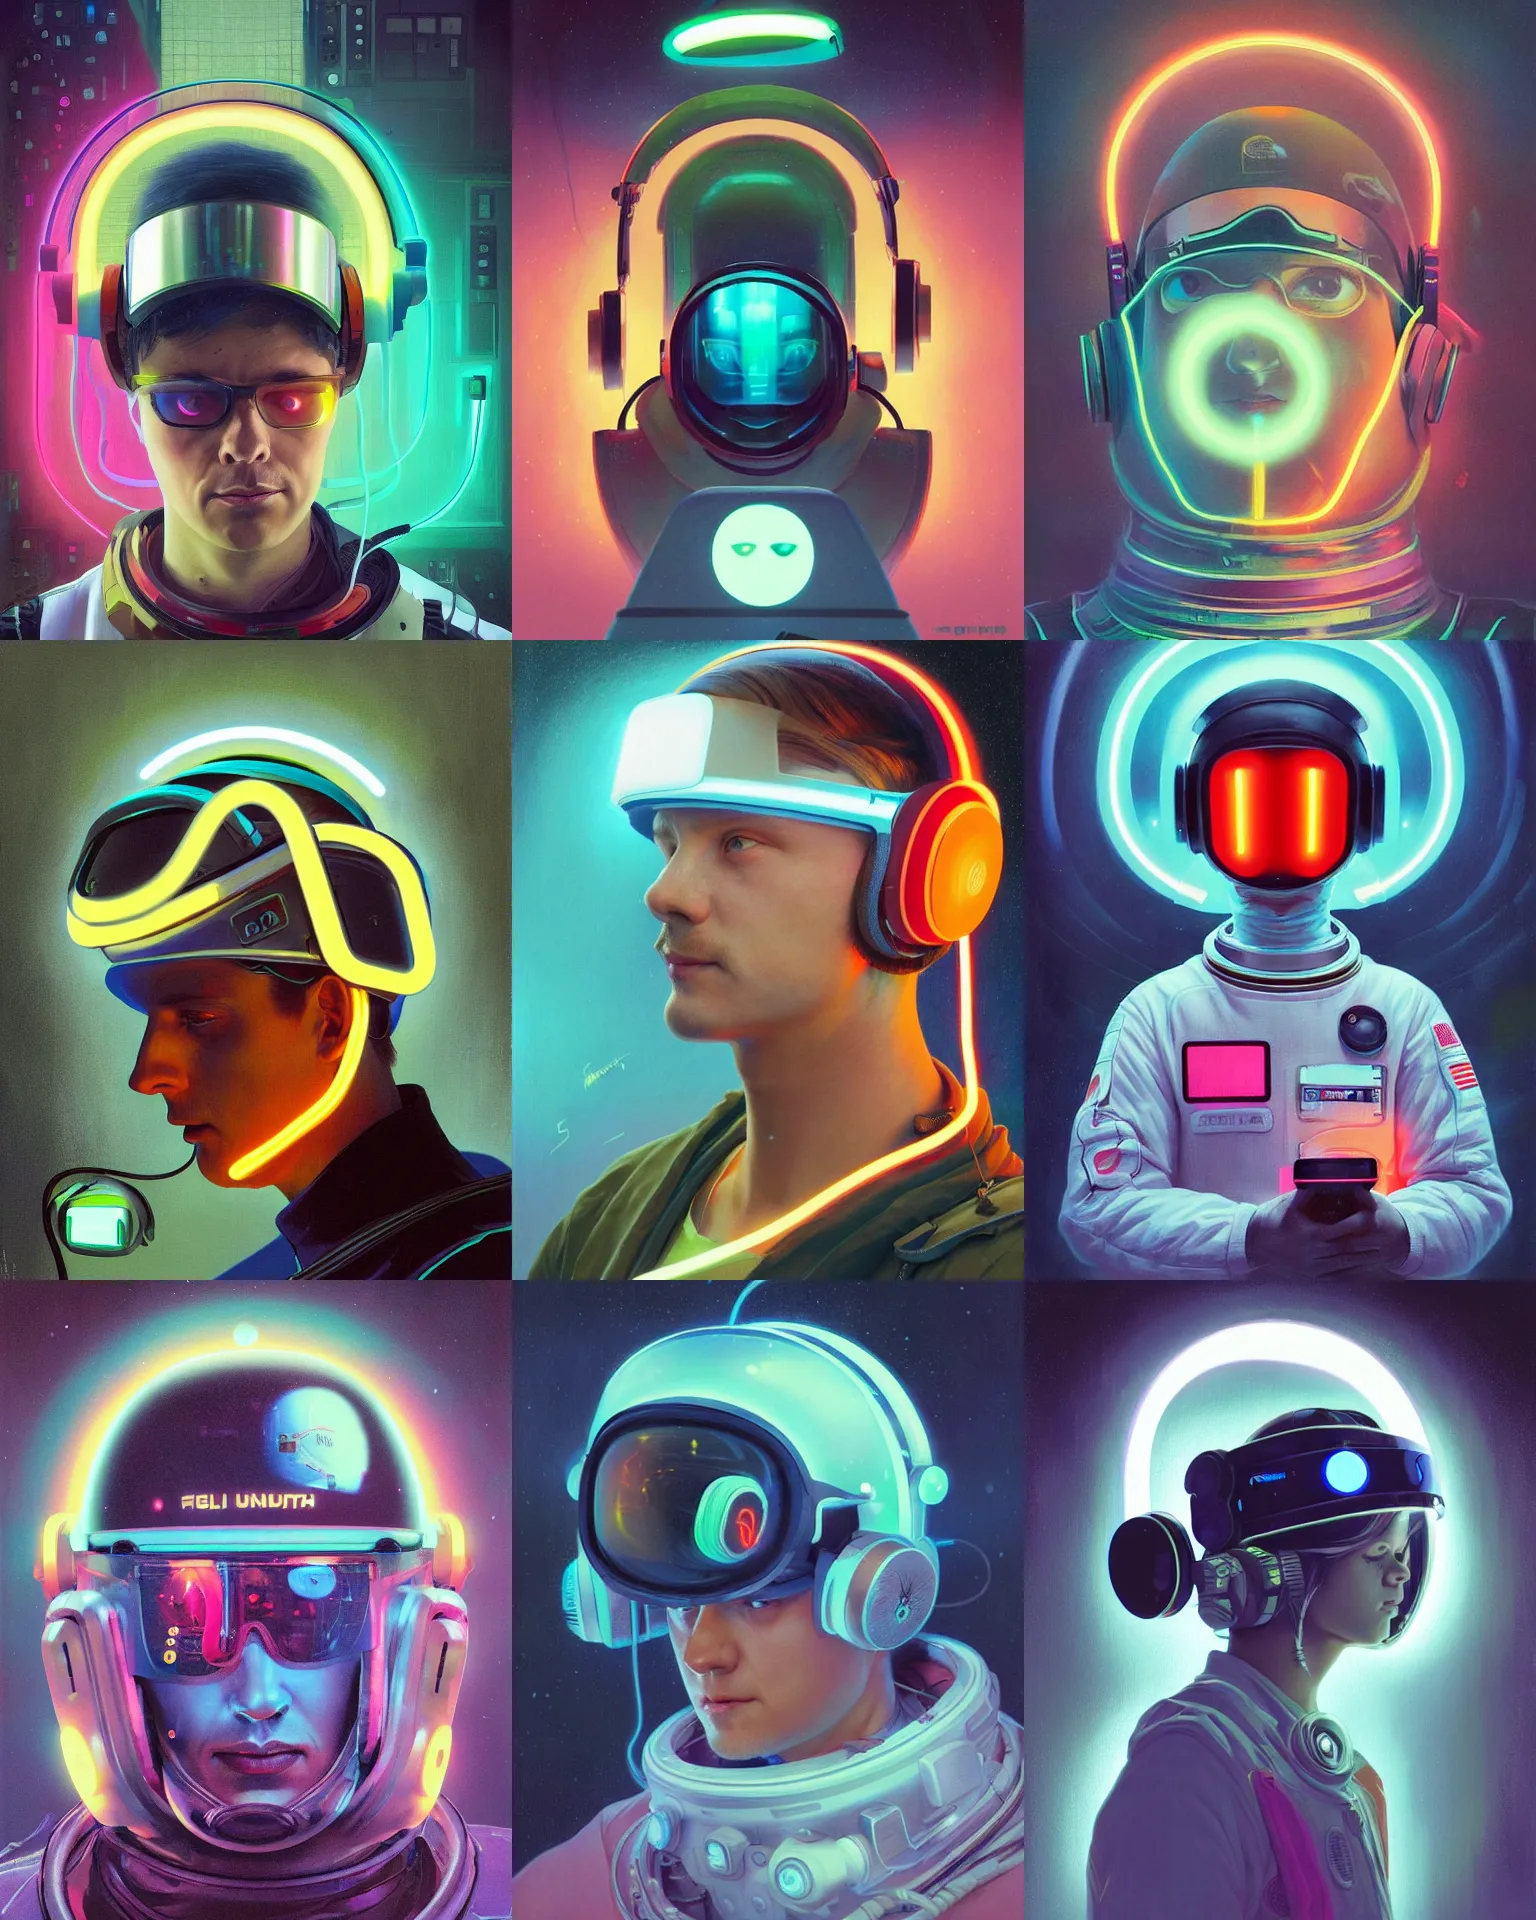 Prompt: finnish future coder looking on, glowing visor over eyes and sleek neon headphones, neon accents, desaturated headshot portrait painting by ilya repin, dean cornwall, rhads, tom whalen, alex grey, alphonse mucha, astronaut cyberpunk electric fashion photography